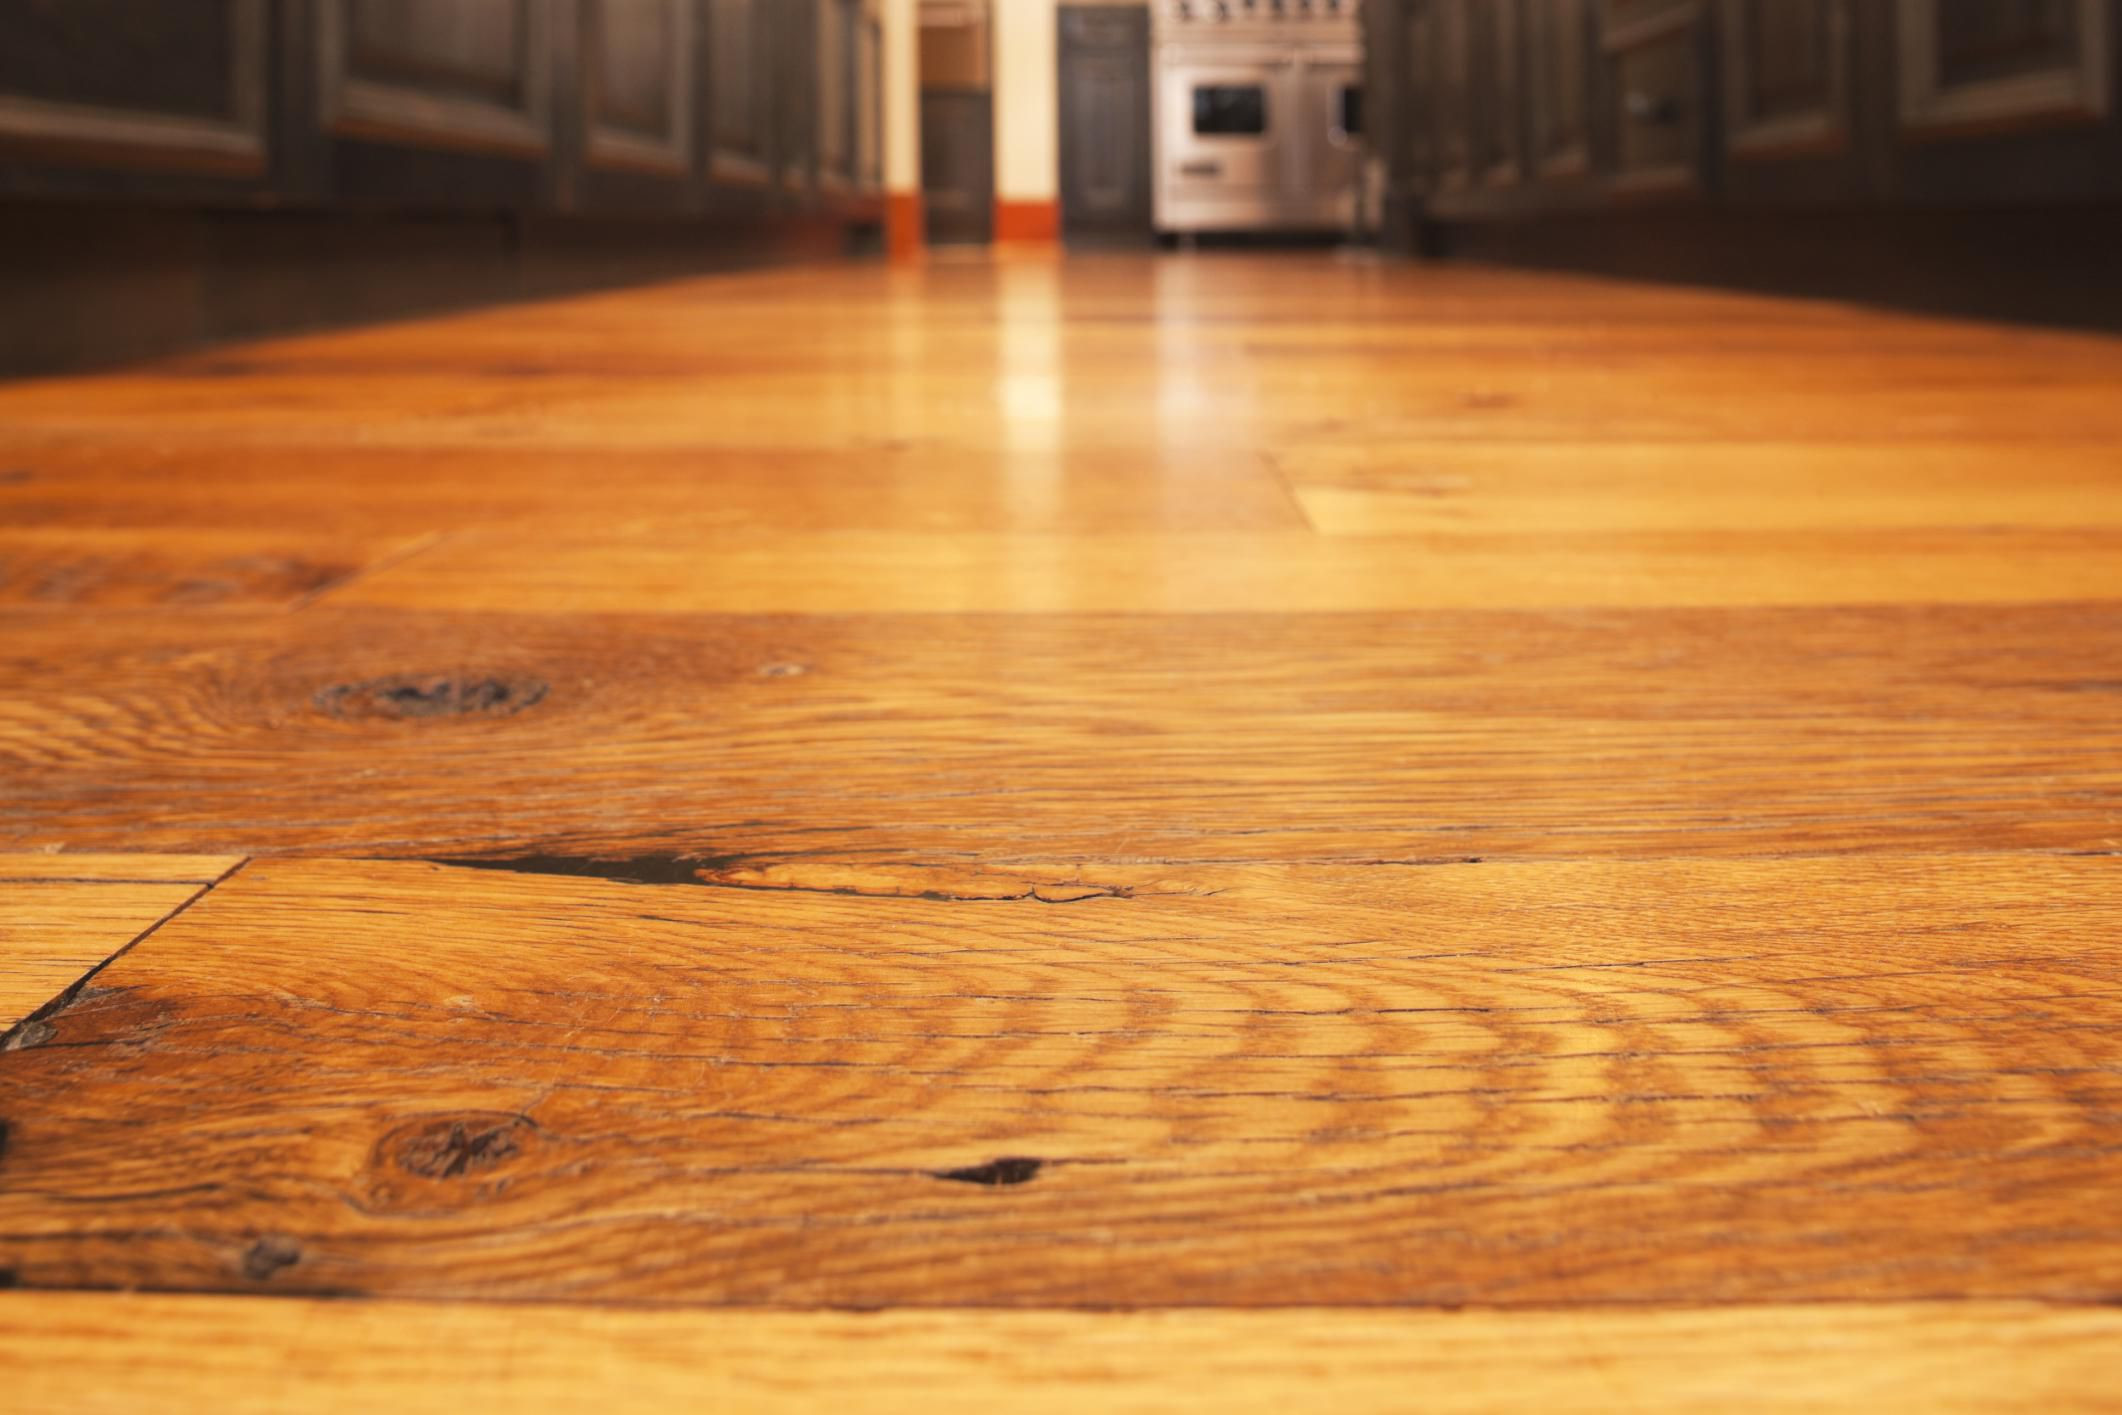 20 Unique How Much Does It Cost to Refinish Hardwood Floors 2024 free download how much does it cost to refinish hardwood floors of how to sand hardwood floors in 185126347 56a49f3d5f9b58b7d0d7e154